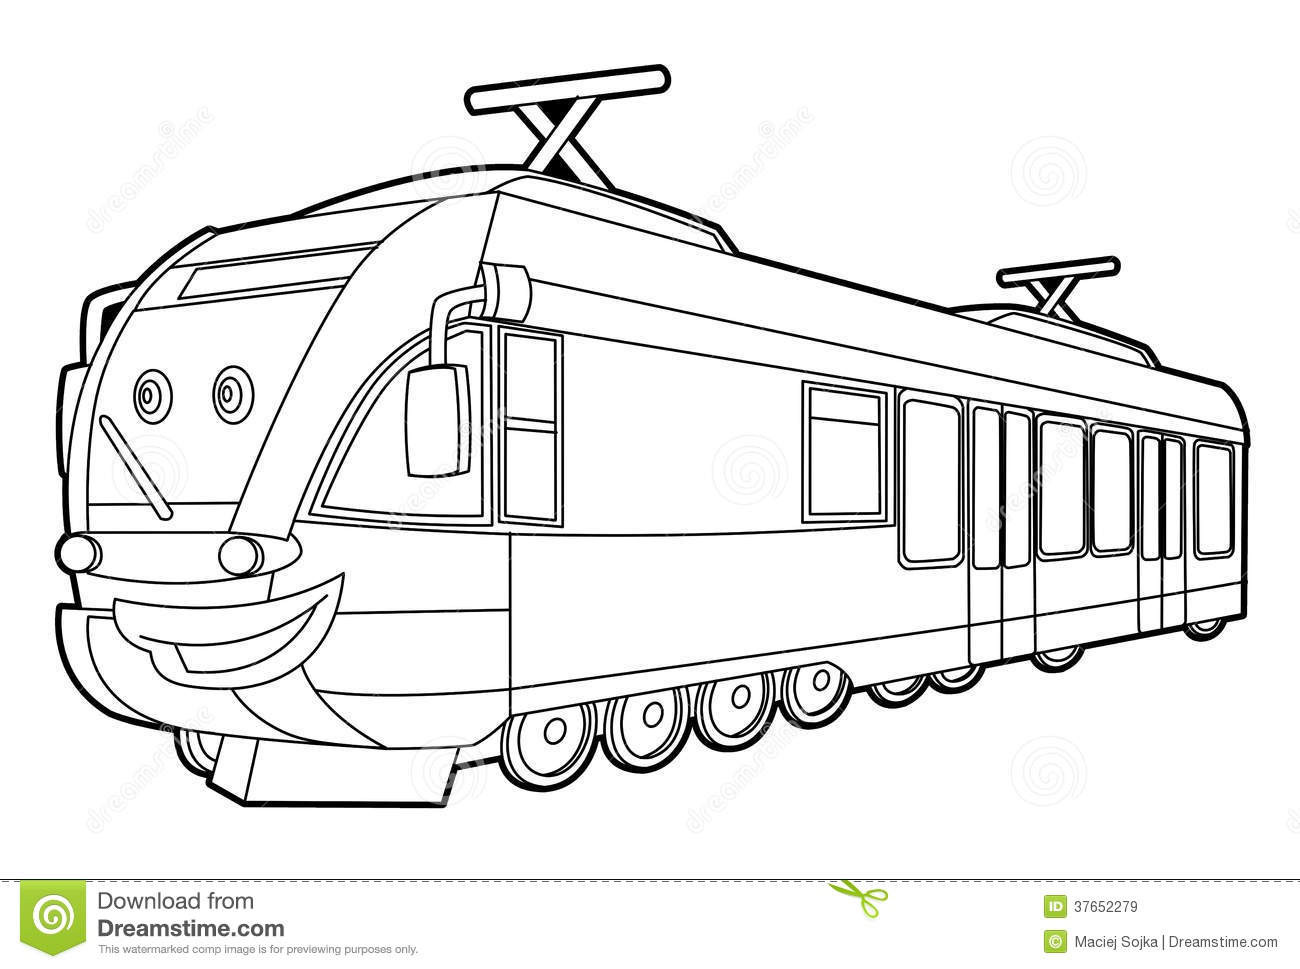 Train Coloring Pages For Kids
 Train Coloring Page For The Children Royalty Free Stock